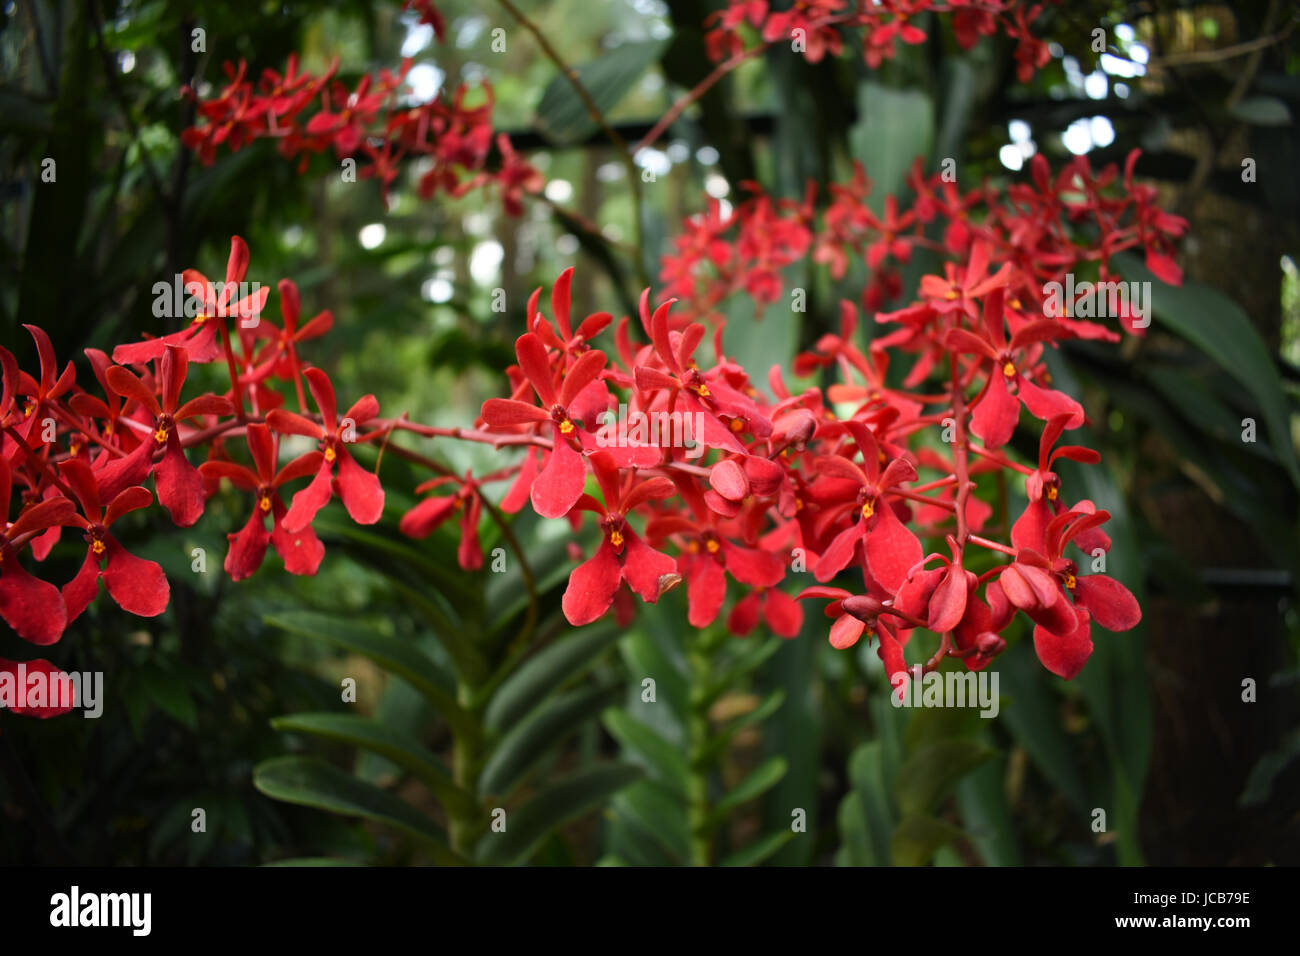 Red orchid flowers with green leaf dark background taken in the botanic garden Stock Photo